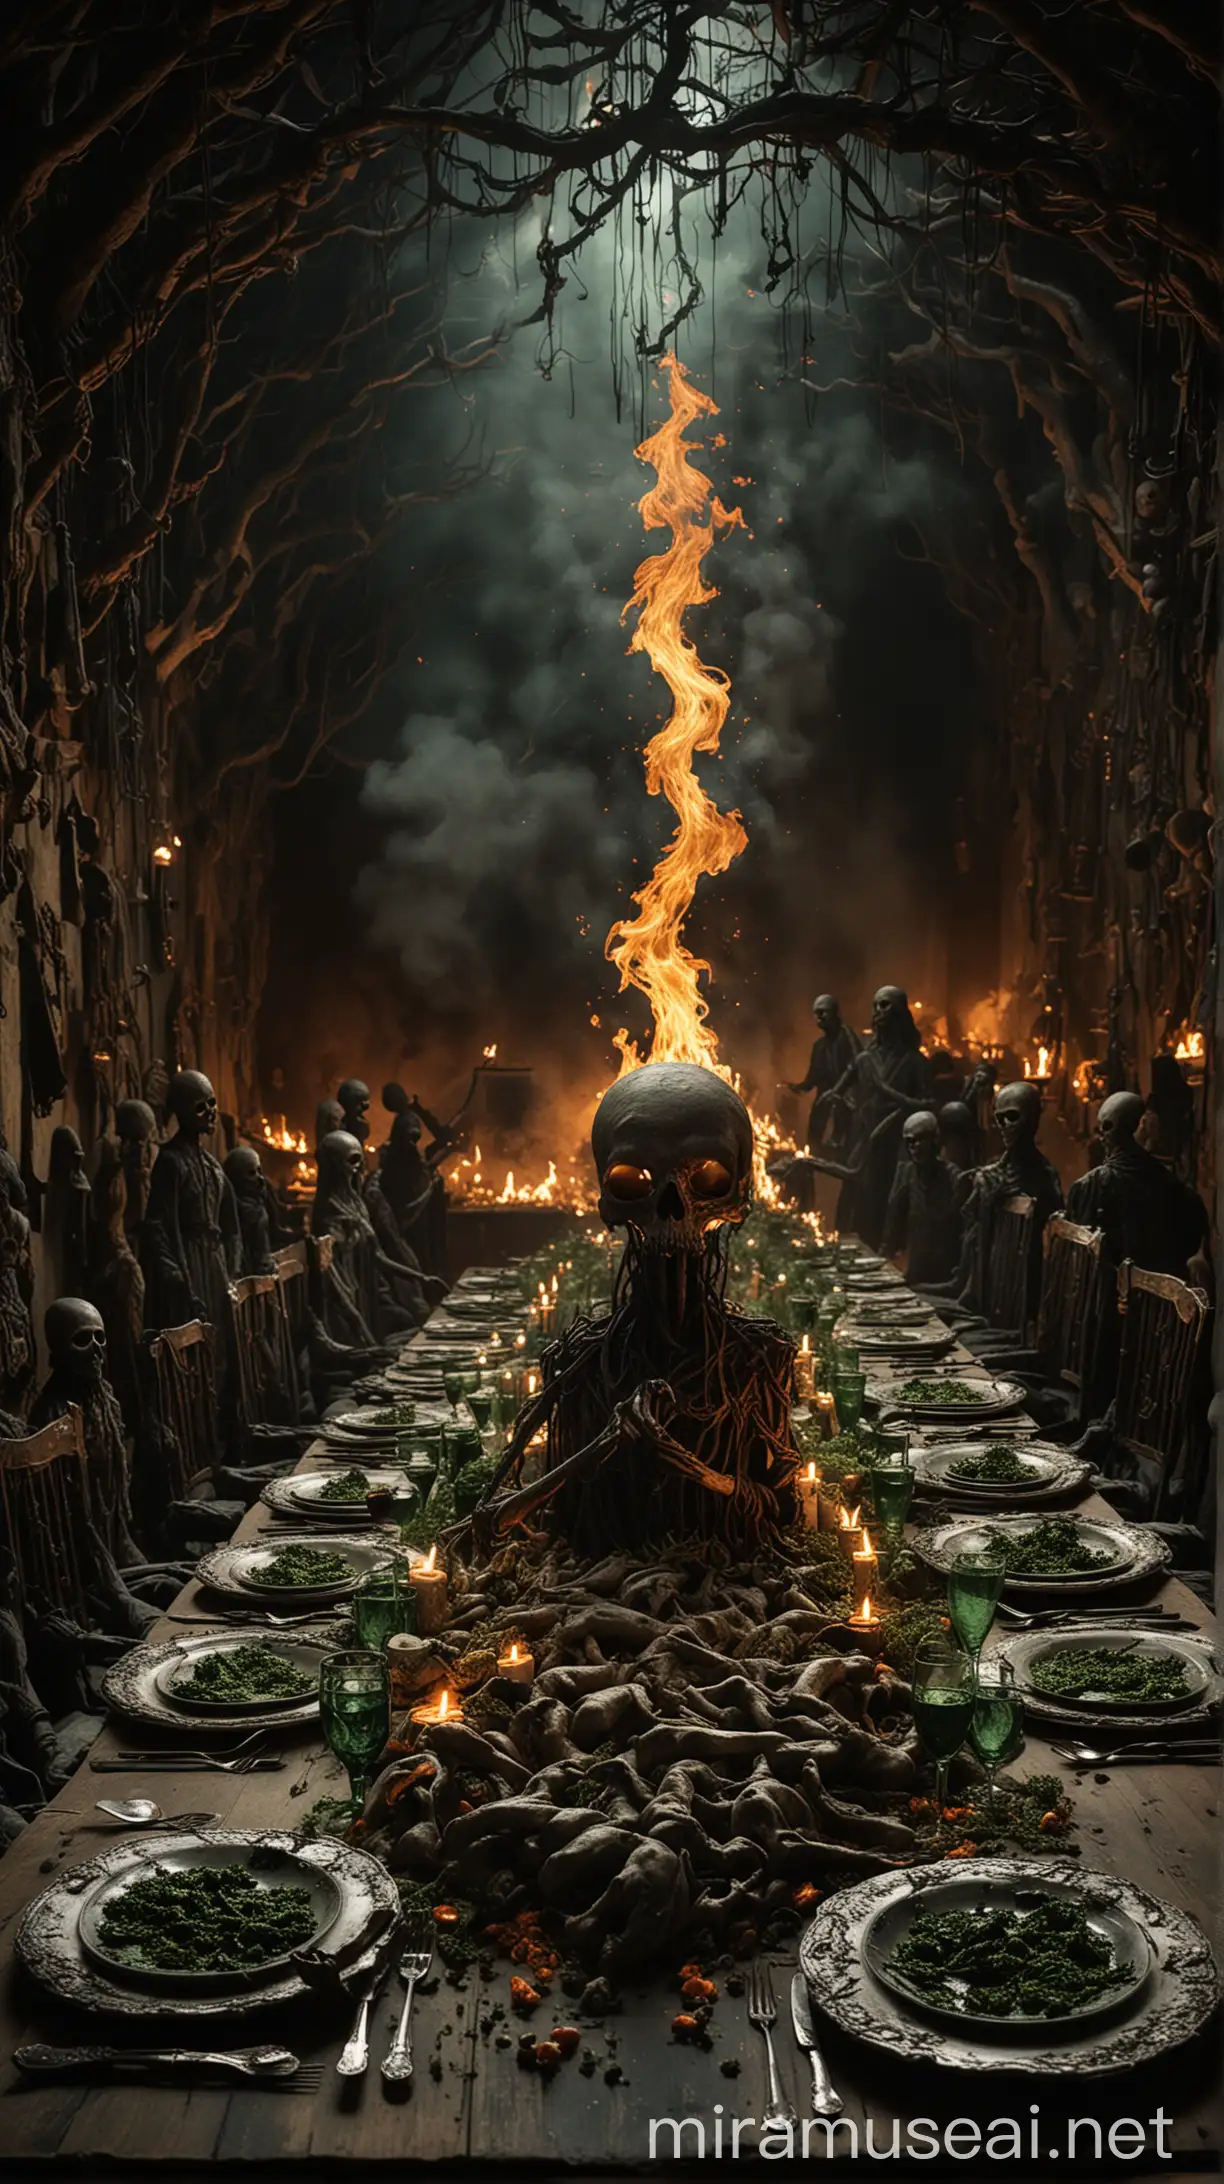 Title: The Banquet of the Damned
Description: A vast, cavernous space filled with flickering flames. In the center, a long, twisted table is laden with plates of wilted, blackened herbs that emit an acrid green smoke. Skeletal figures with anguished expressions reach out desperately towards the food.
Style: Dark fantasy, highly detailed, WITH ISLAMIC TRADITION